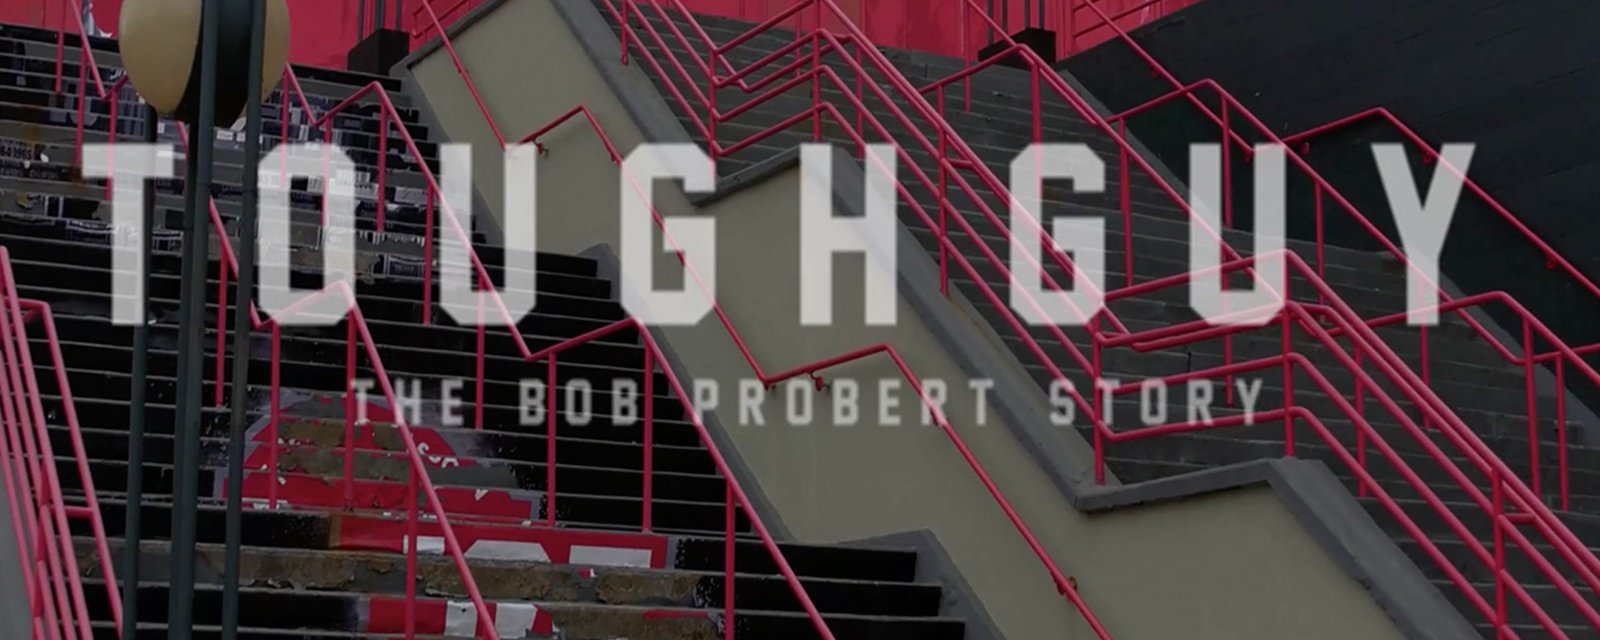 ICYMI: Check out the awesome trailer for the new Bob Probert documentary “Tough Guy”